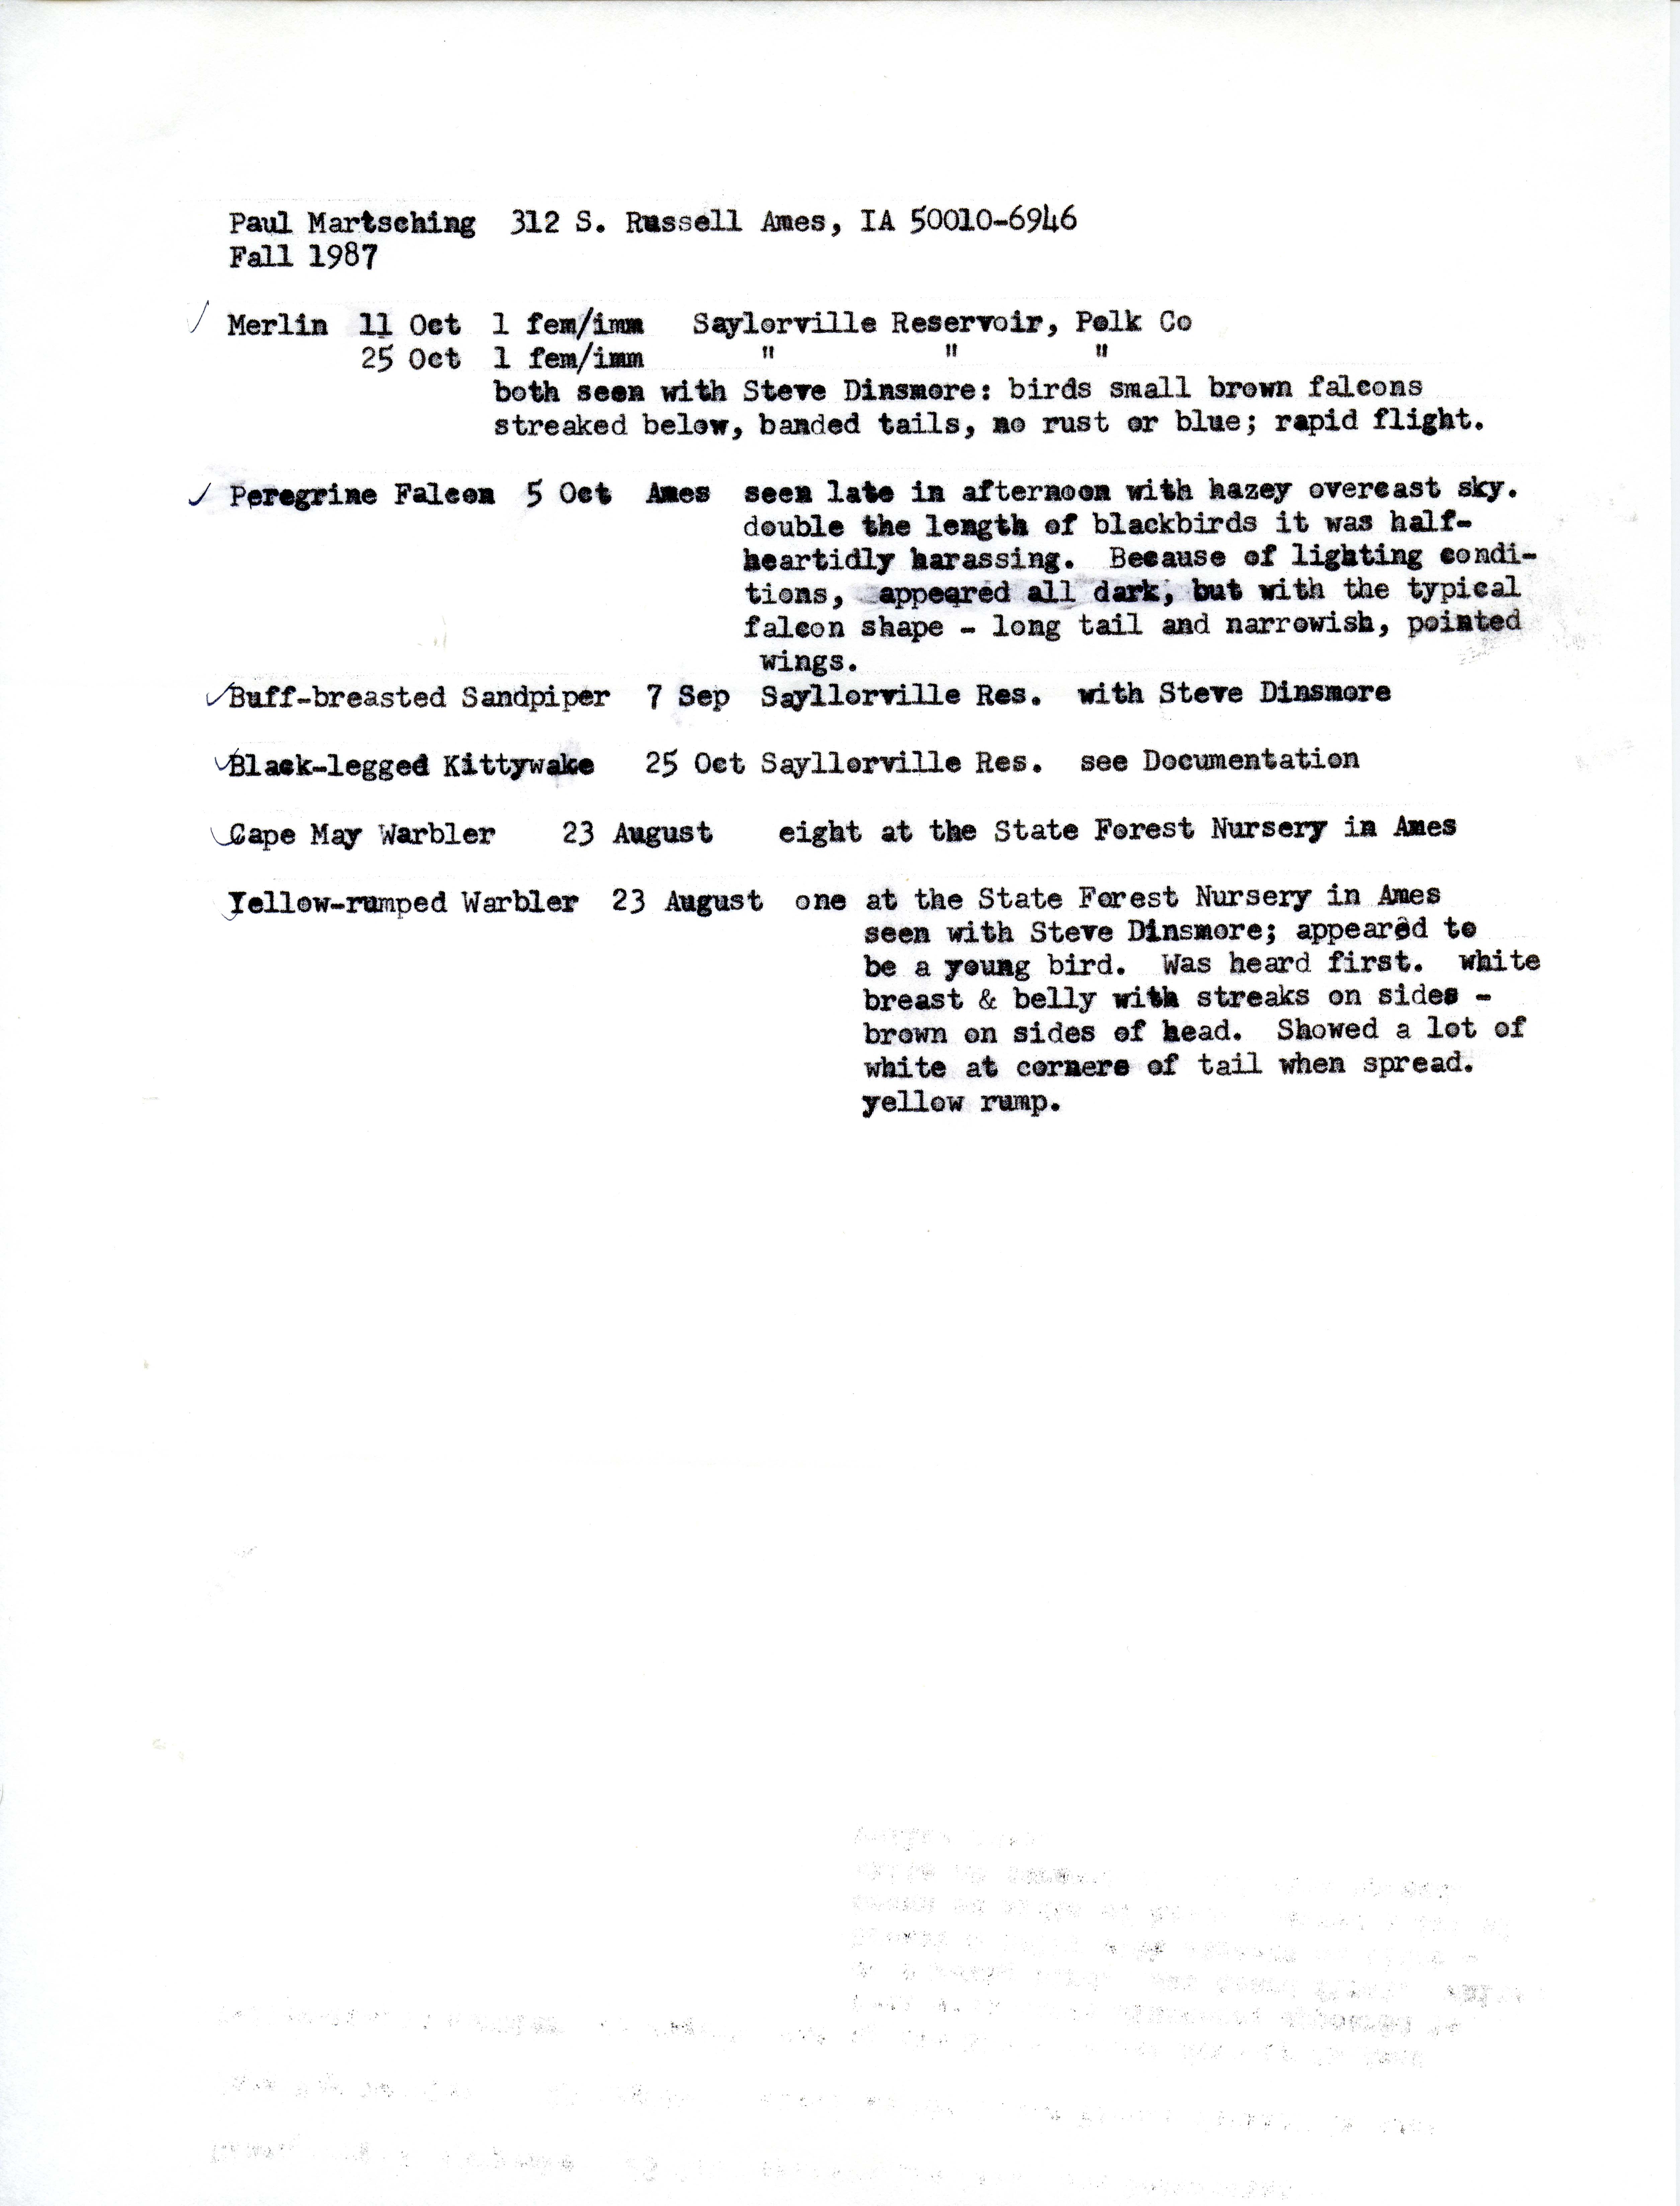 Field notes contributed by Paul Martsching, fall 1987